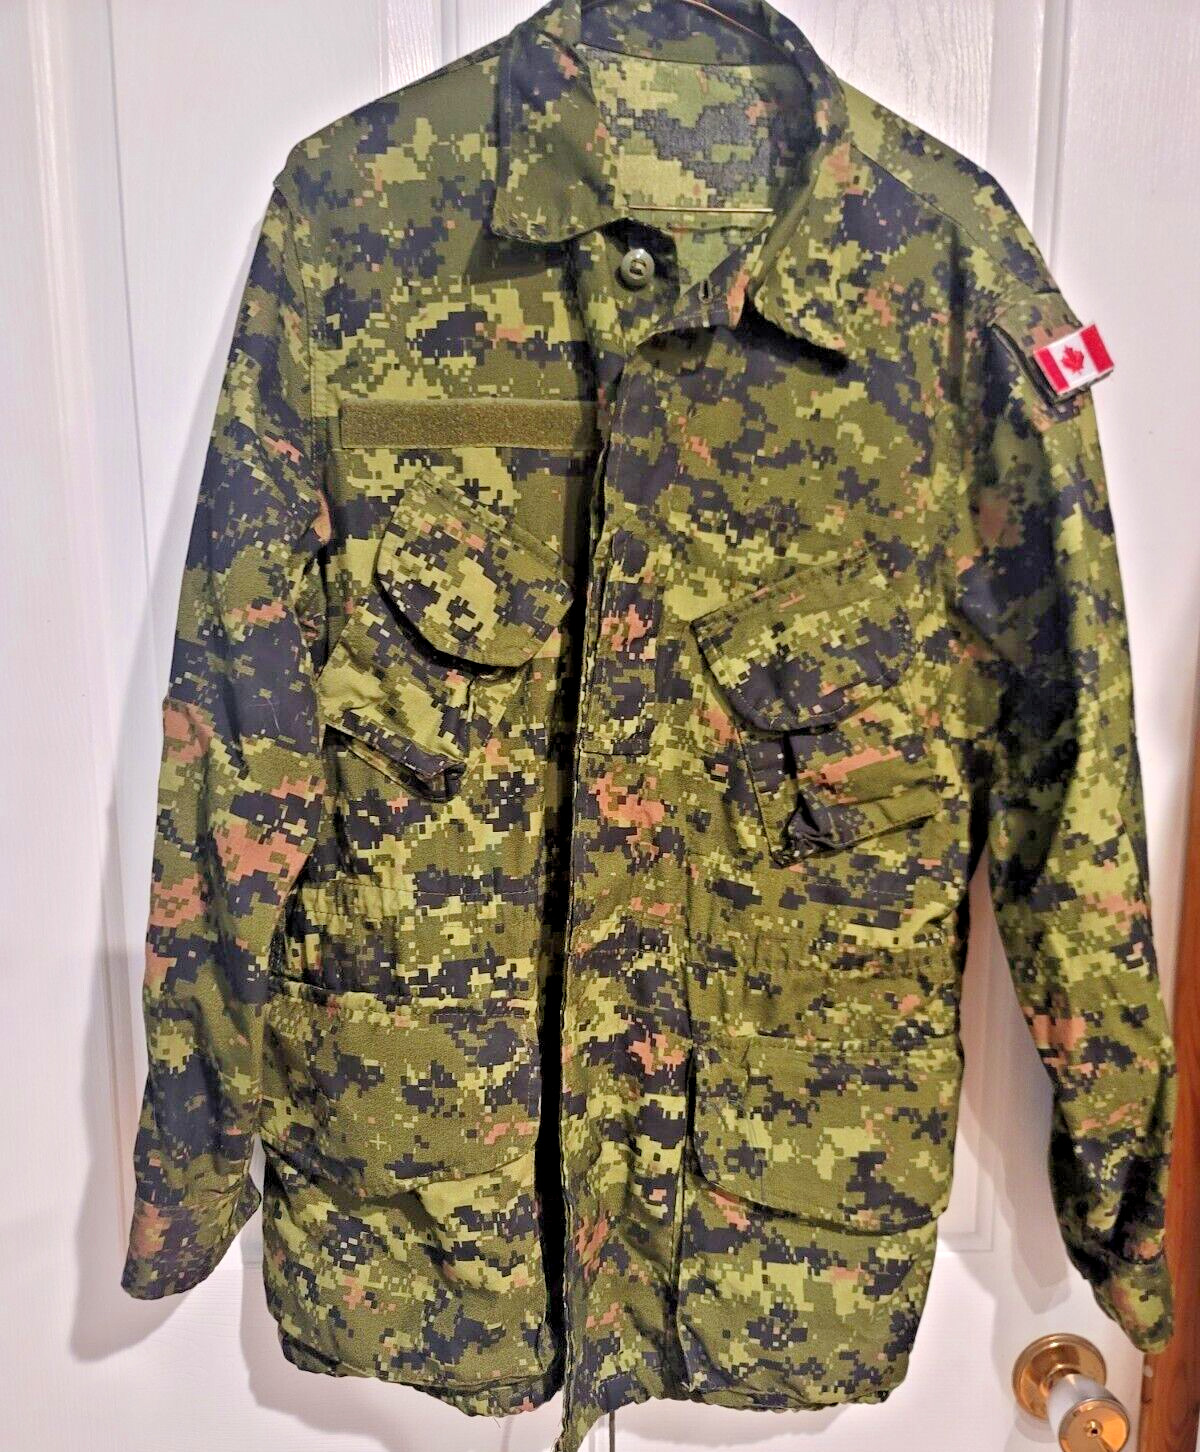 CANADIAN ARMY NOS CADPAT DIGITAL TEMPERATE CAMOUFLAGE CAMO SHIRT 7040 REG-LG OBS